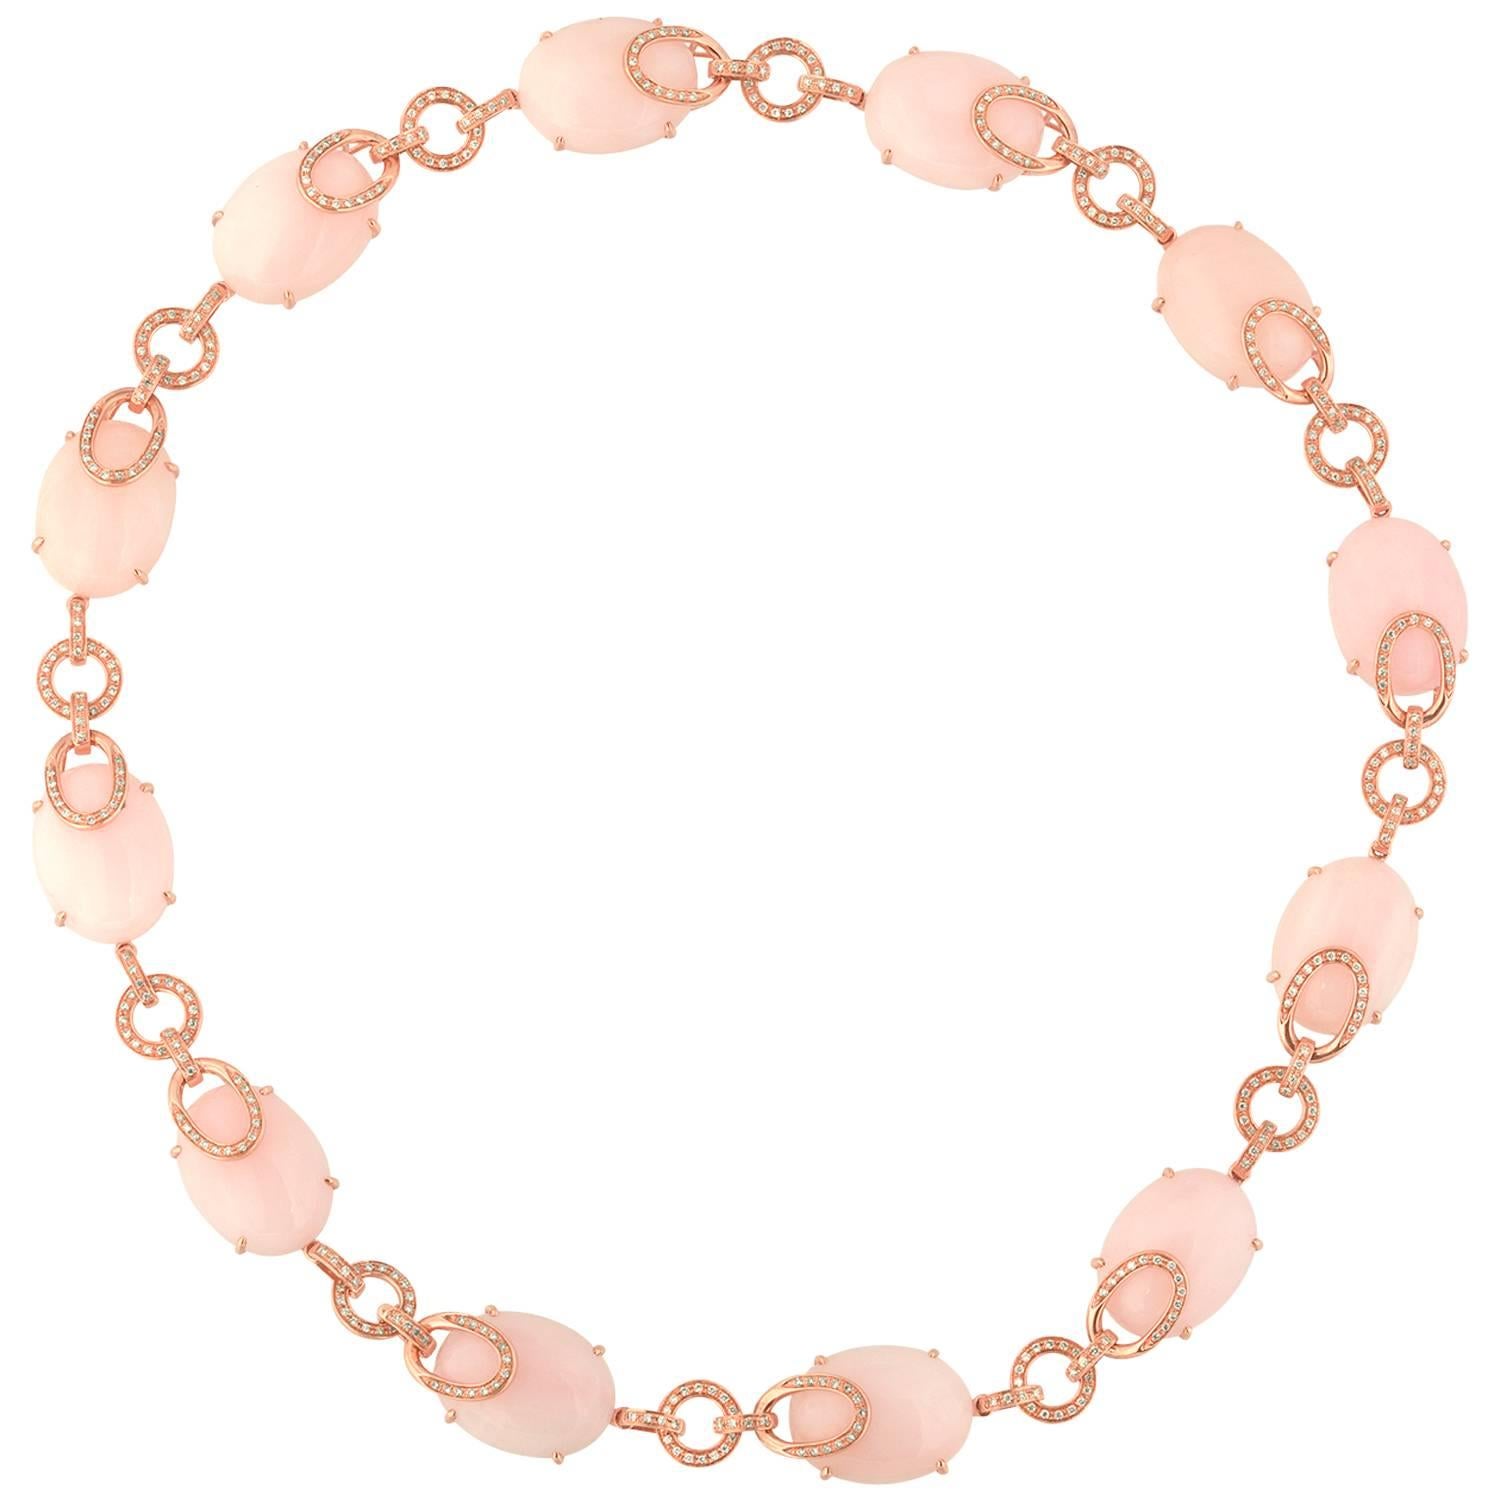 168.00 Carats Pink & Peach Opal and Diamond Gold Necklace